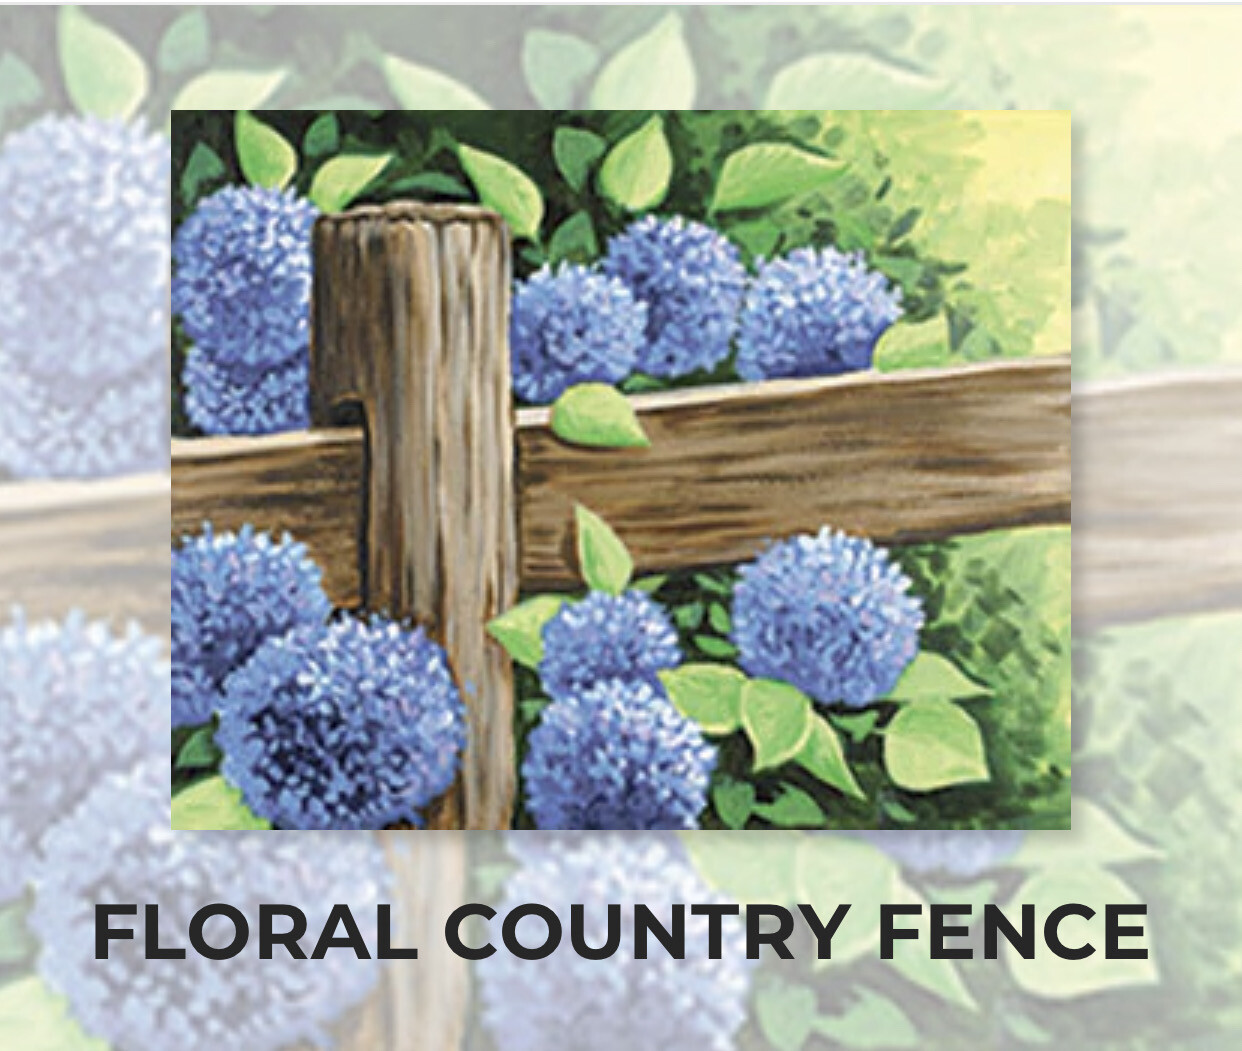 Floral Country Fence ADULT Acrylic Paint On Canvas DIY Art Kit - 3 Week Special Order